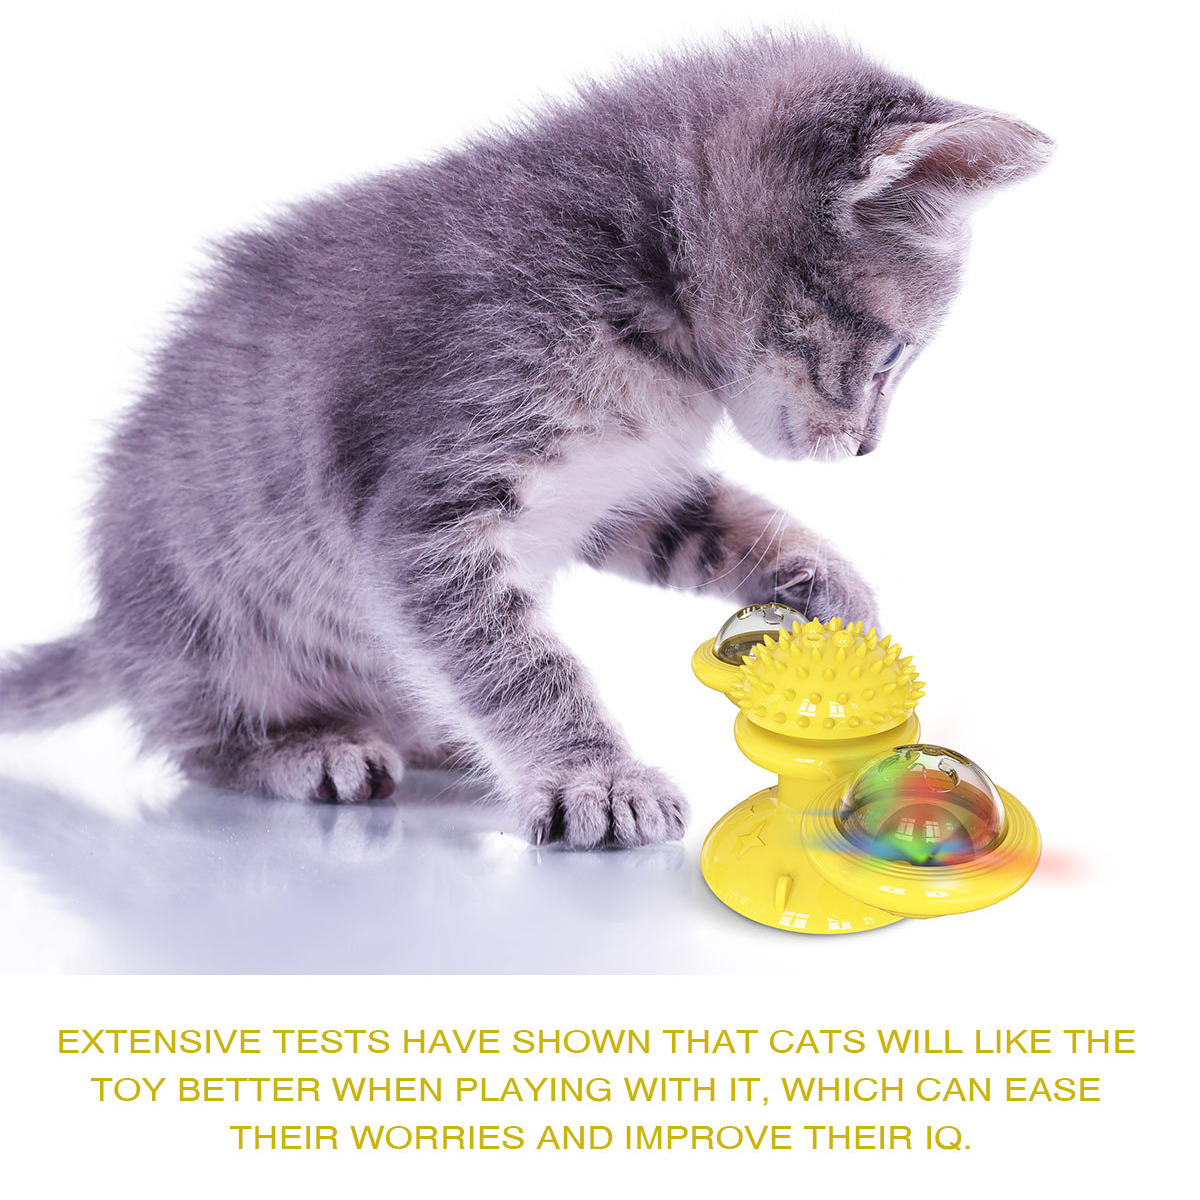 Cat-Funny-Toy-Multifunction-Windmill-Turntable-Massage-Tickle-Toy-Hair-Brush-Pet-Interactive-Game-wi-1865369-4